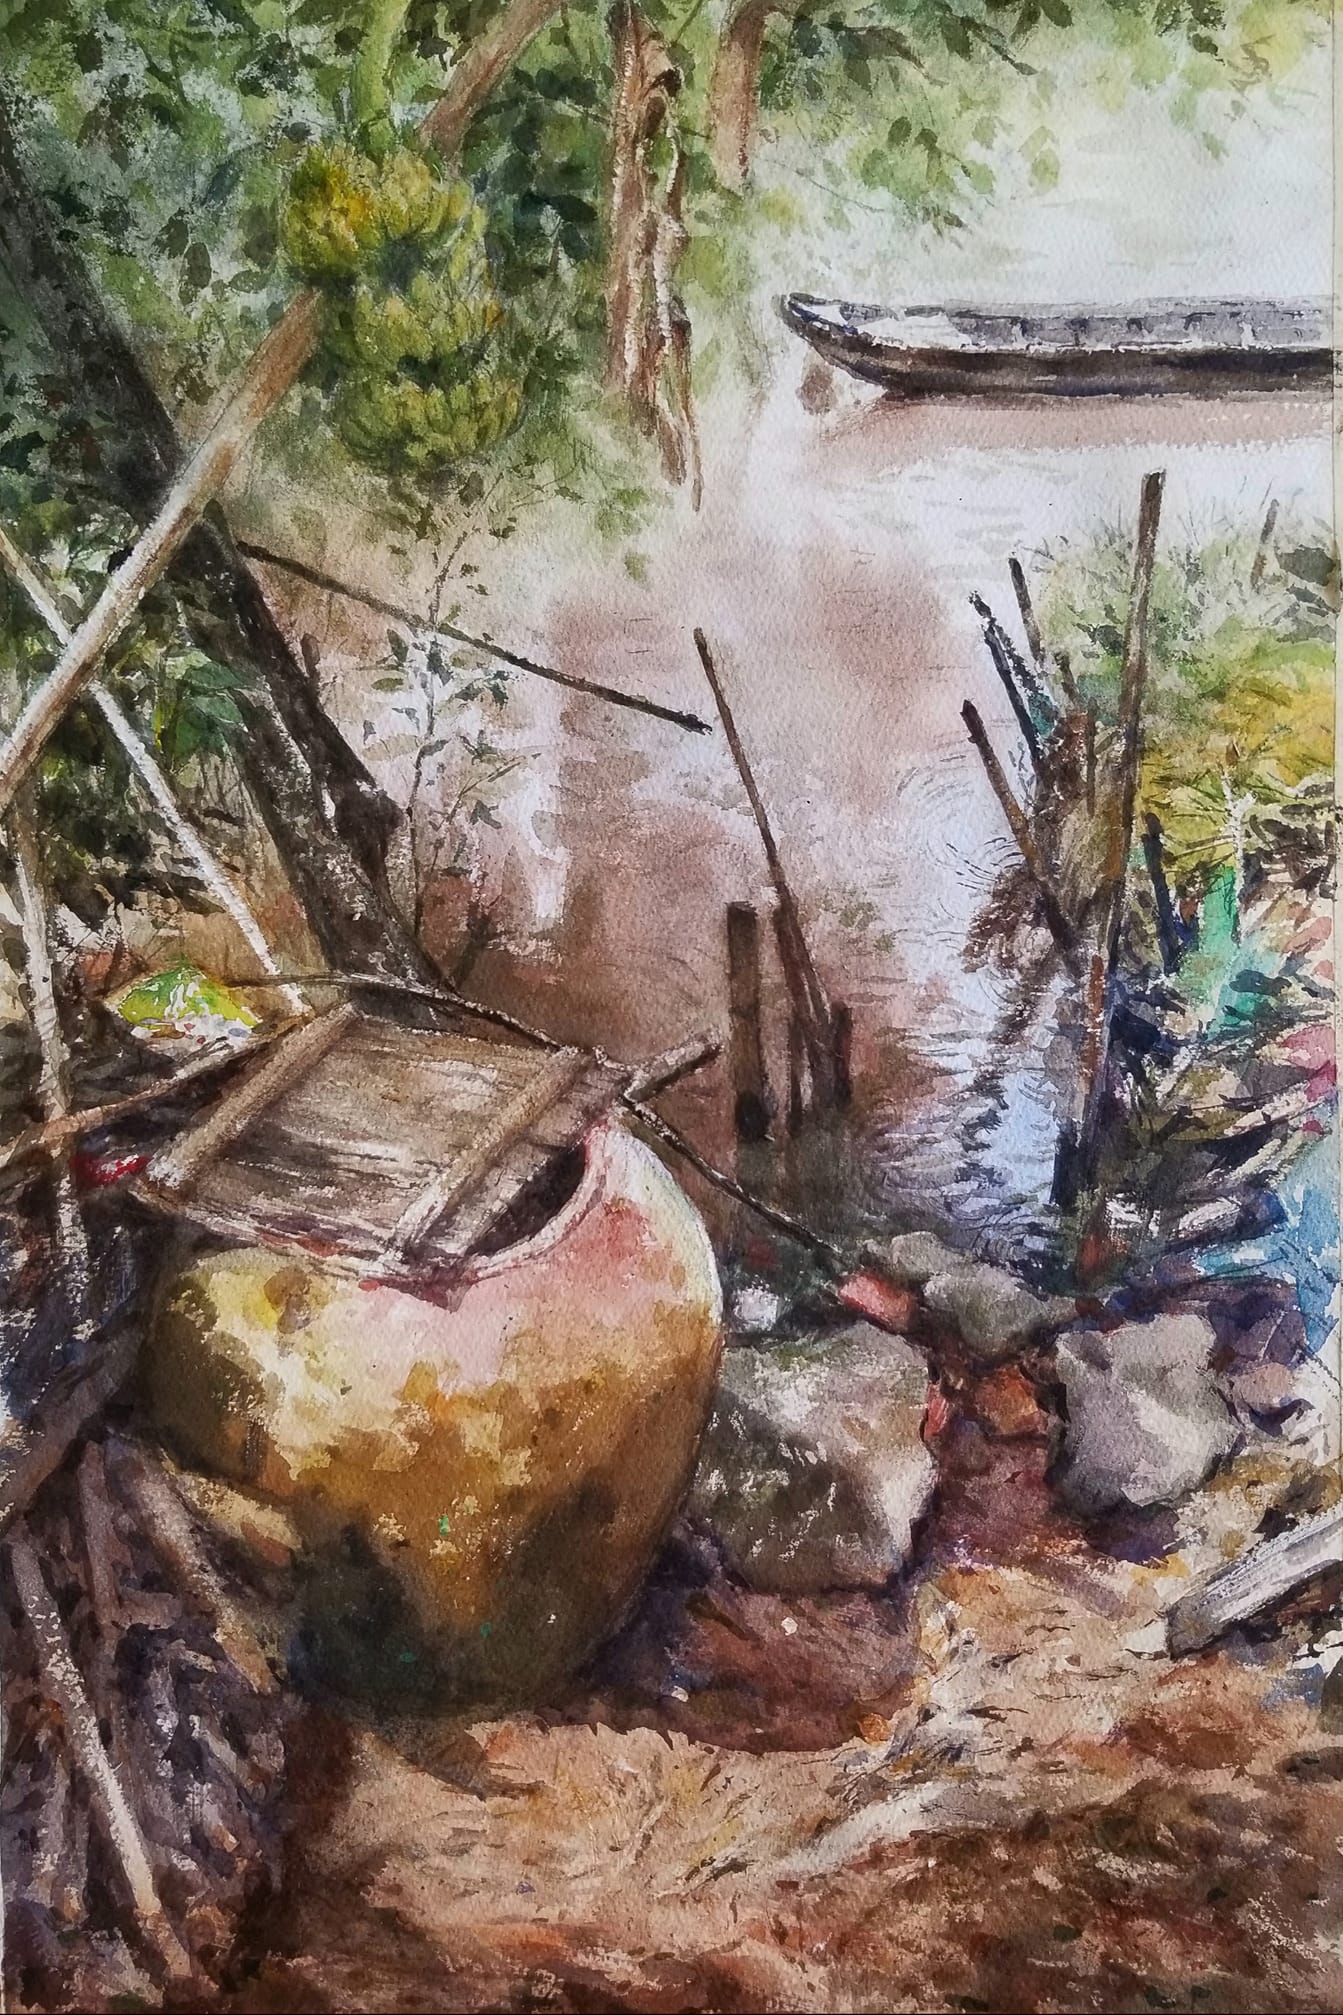 <em>This painting by Vincent Monluc shows a ceramic water jar by the verge of the Mekong River in Can Tho City, Vietnam.</em>